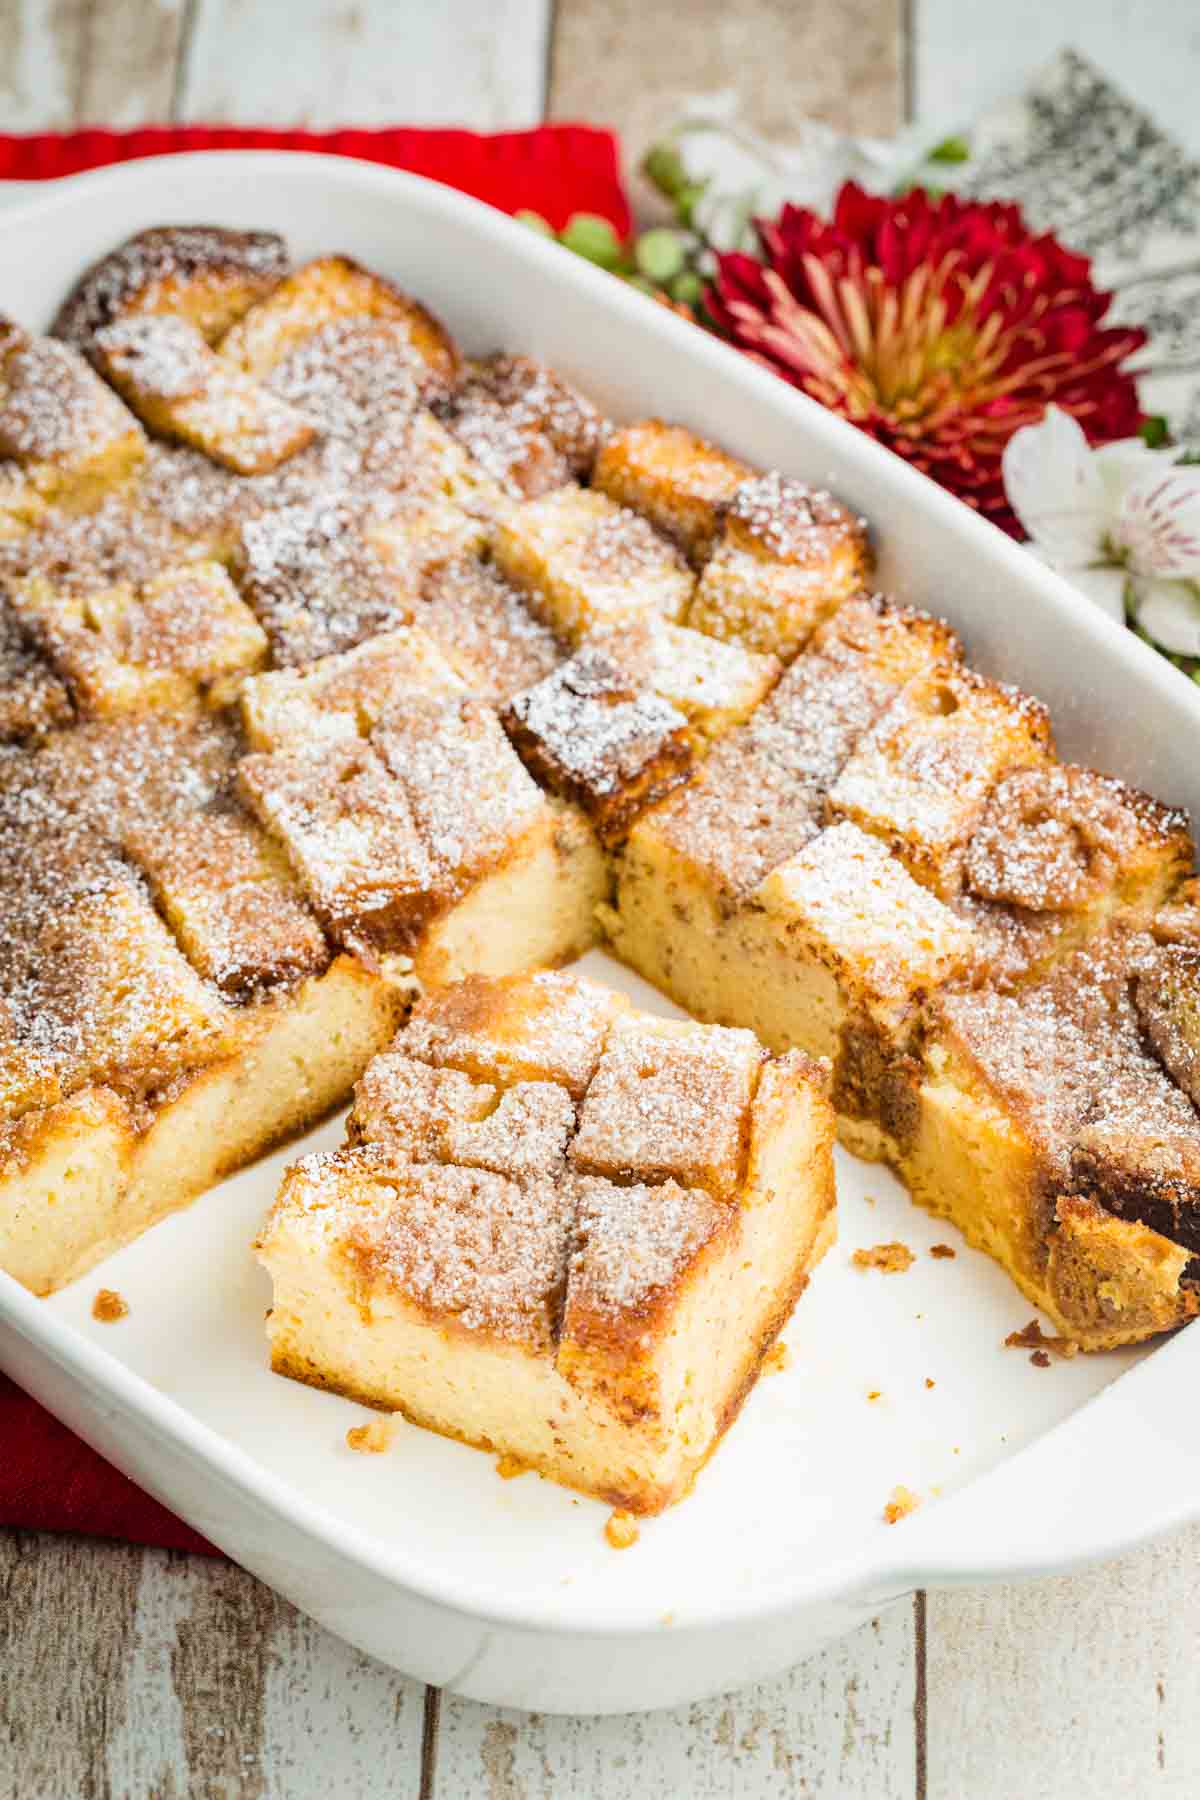 Pieces of French toast casserole are shown in a white baking dish surrounded by red and white flowers.